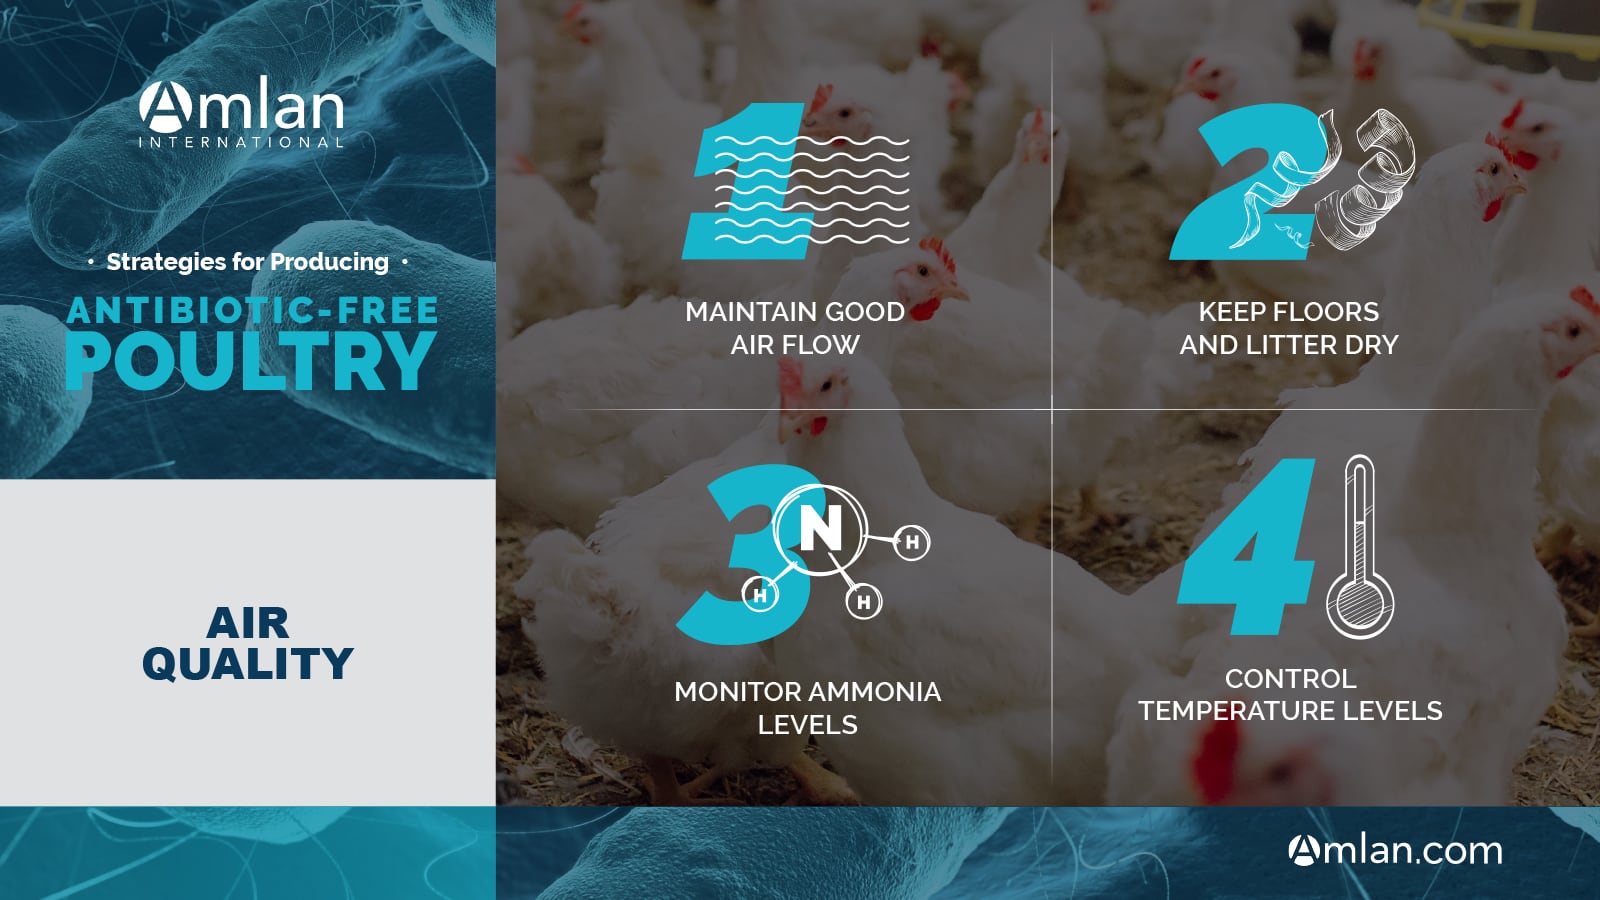 Antibiotic-free poultry air quality infographic.